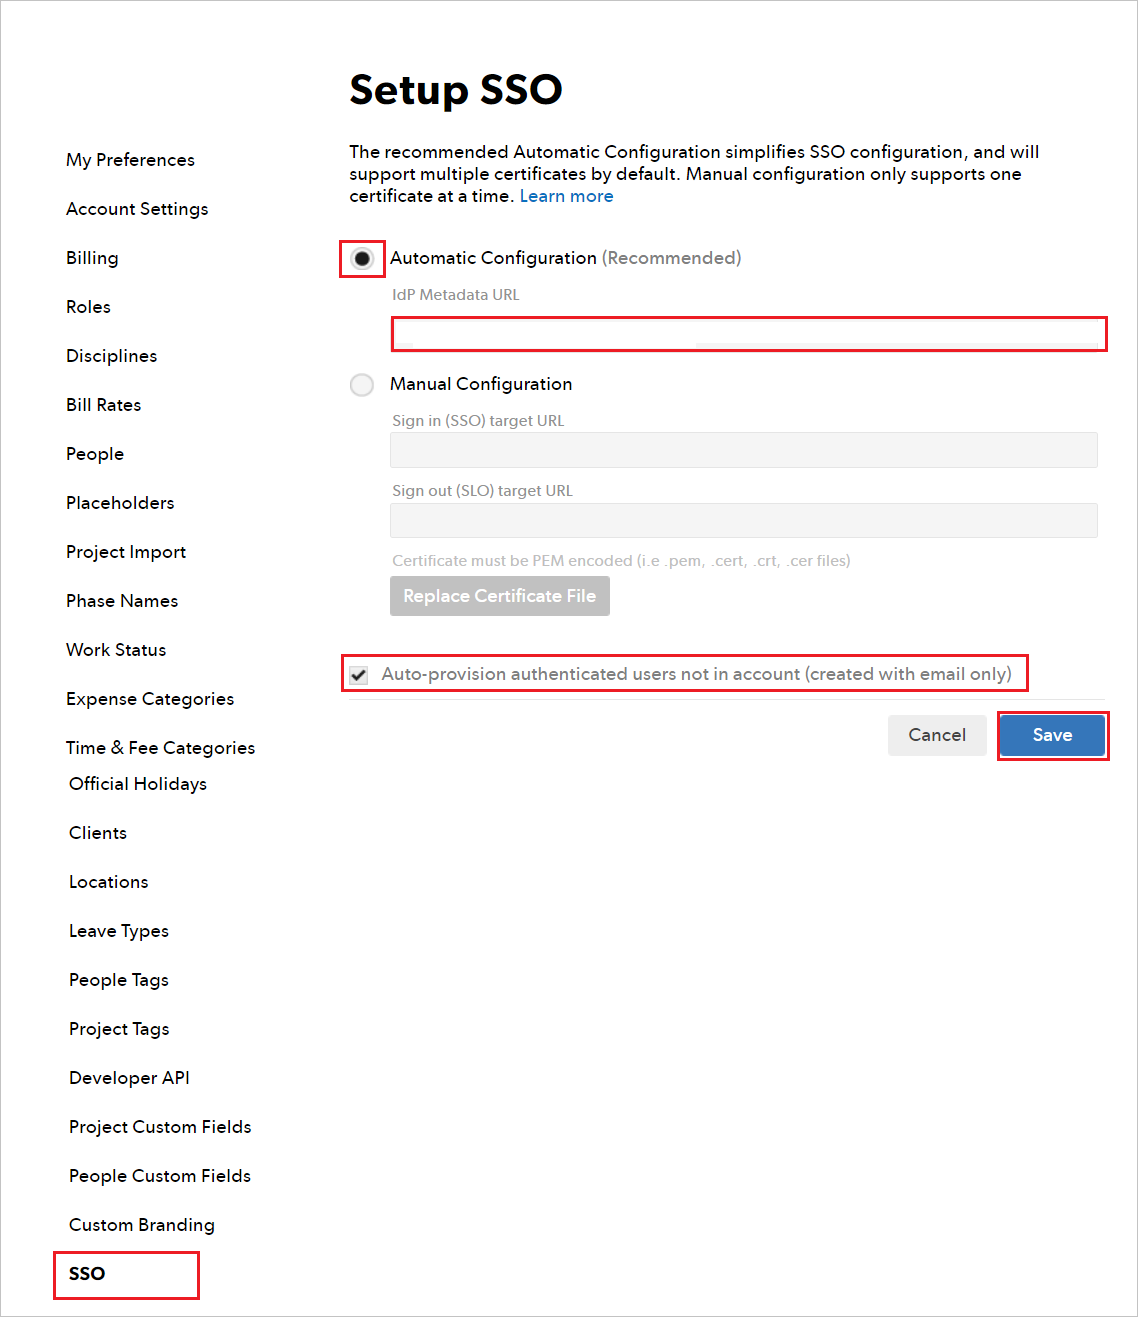 Screenshot for Settings SSO page.